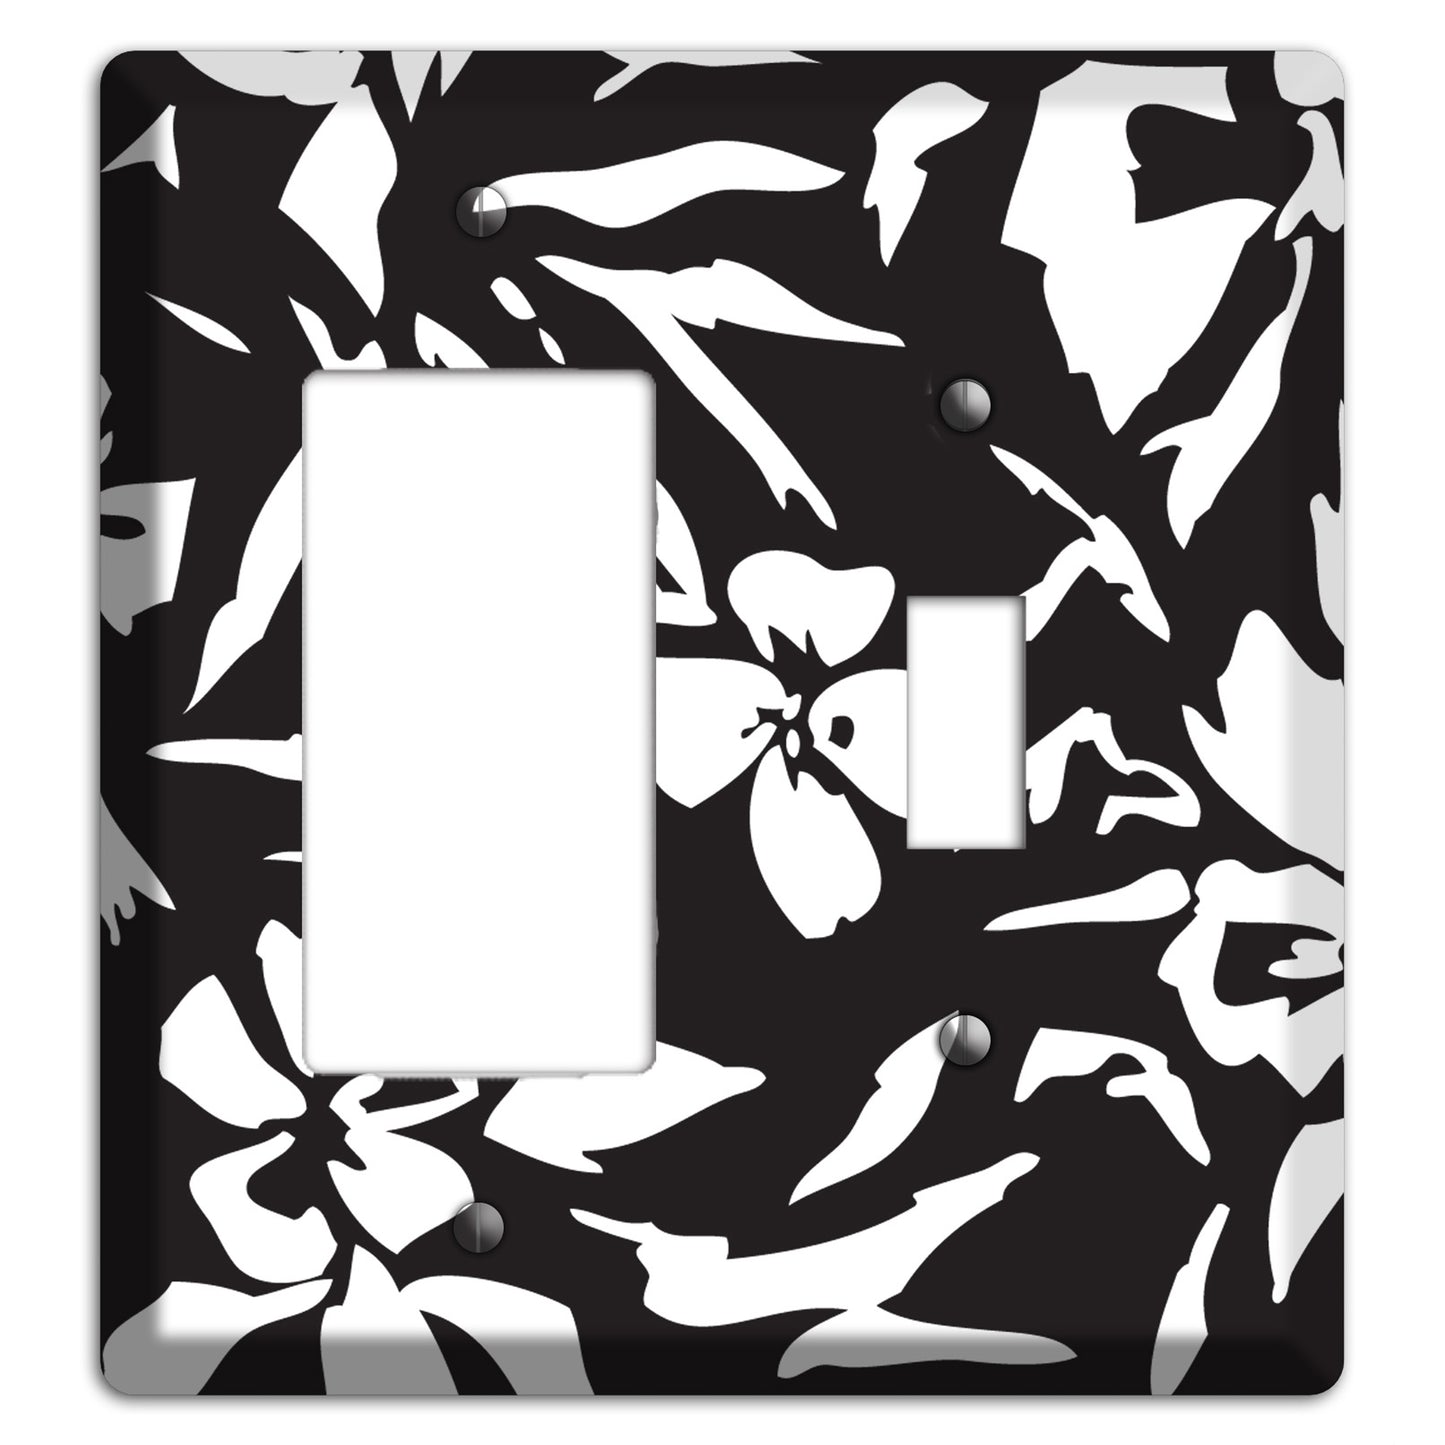 Black with White Woodcut Floral Rocker / Toggle Wallplate